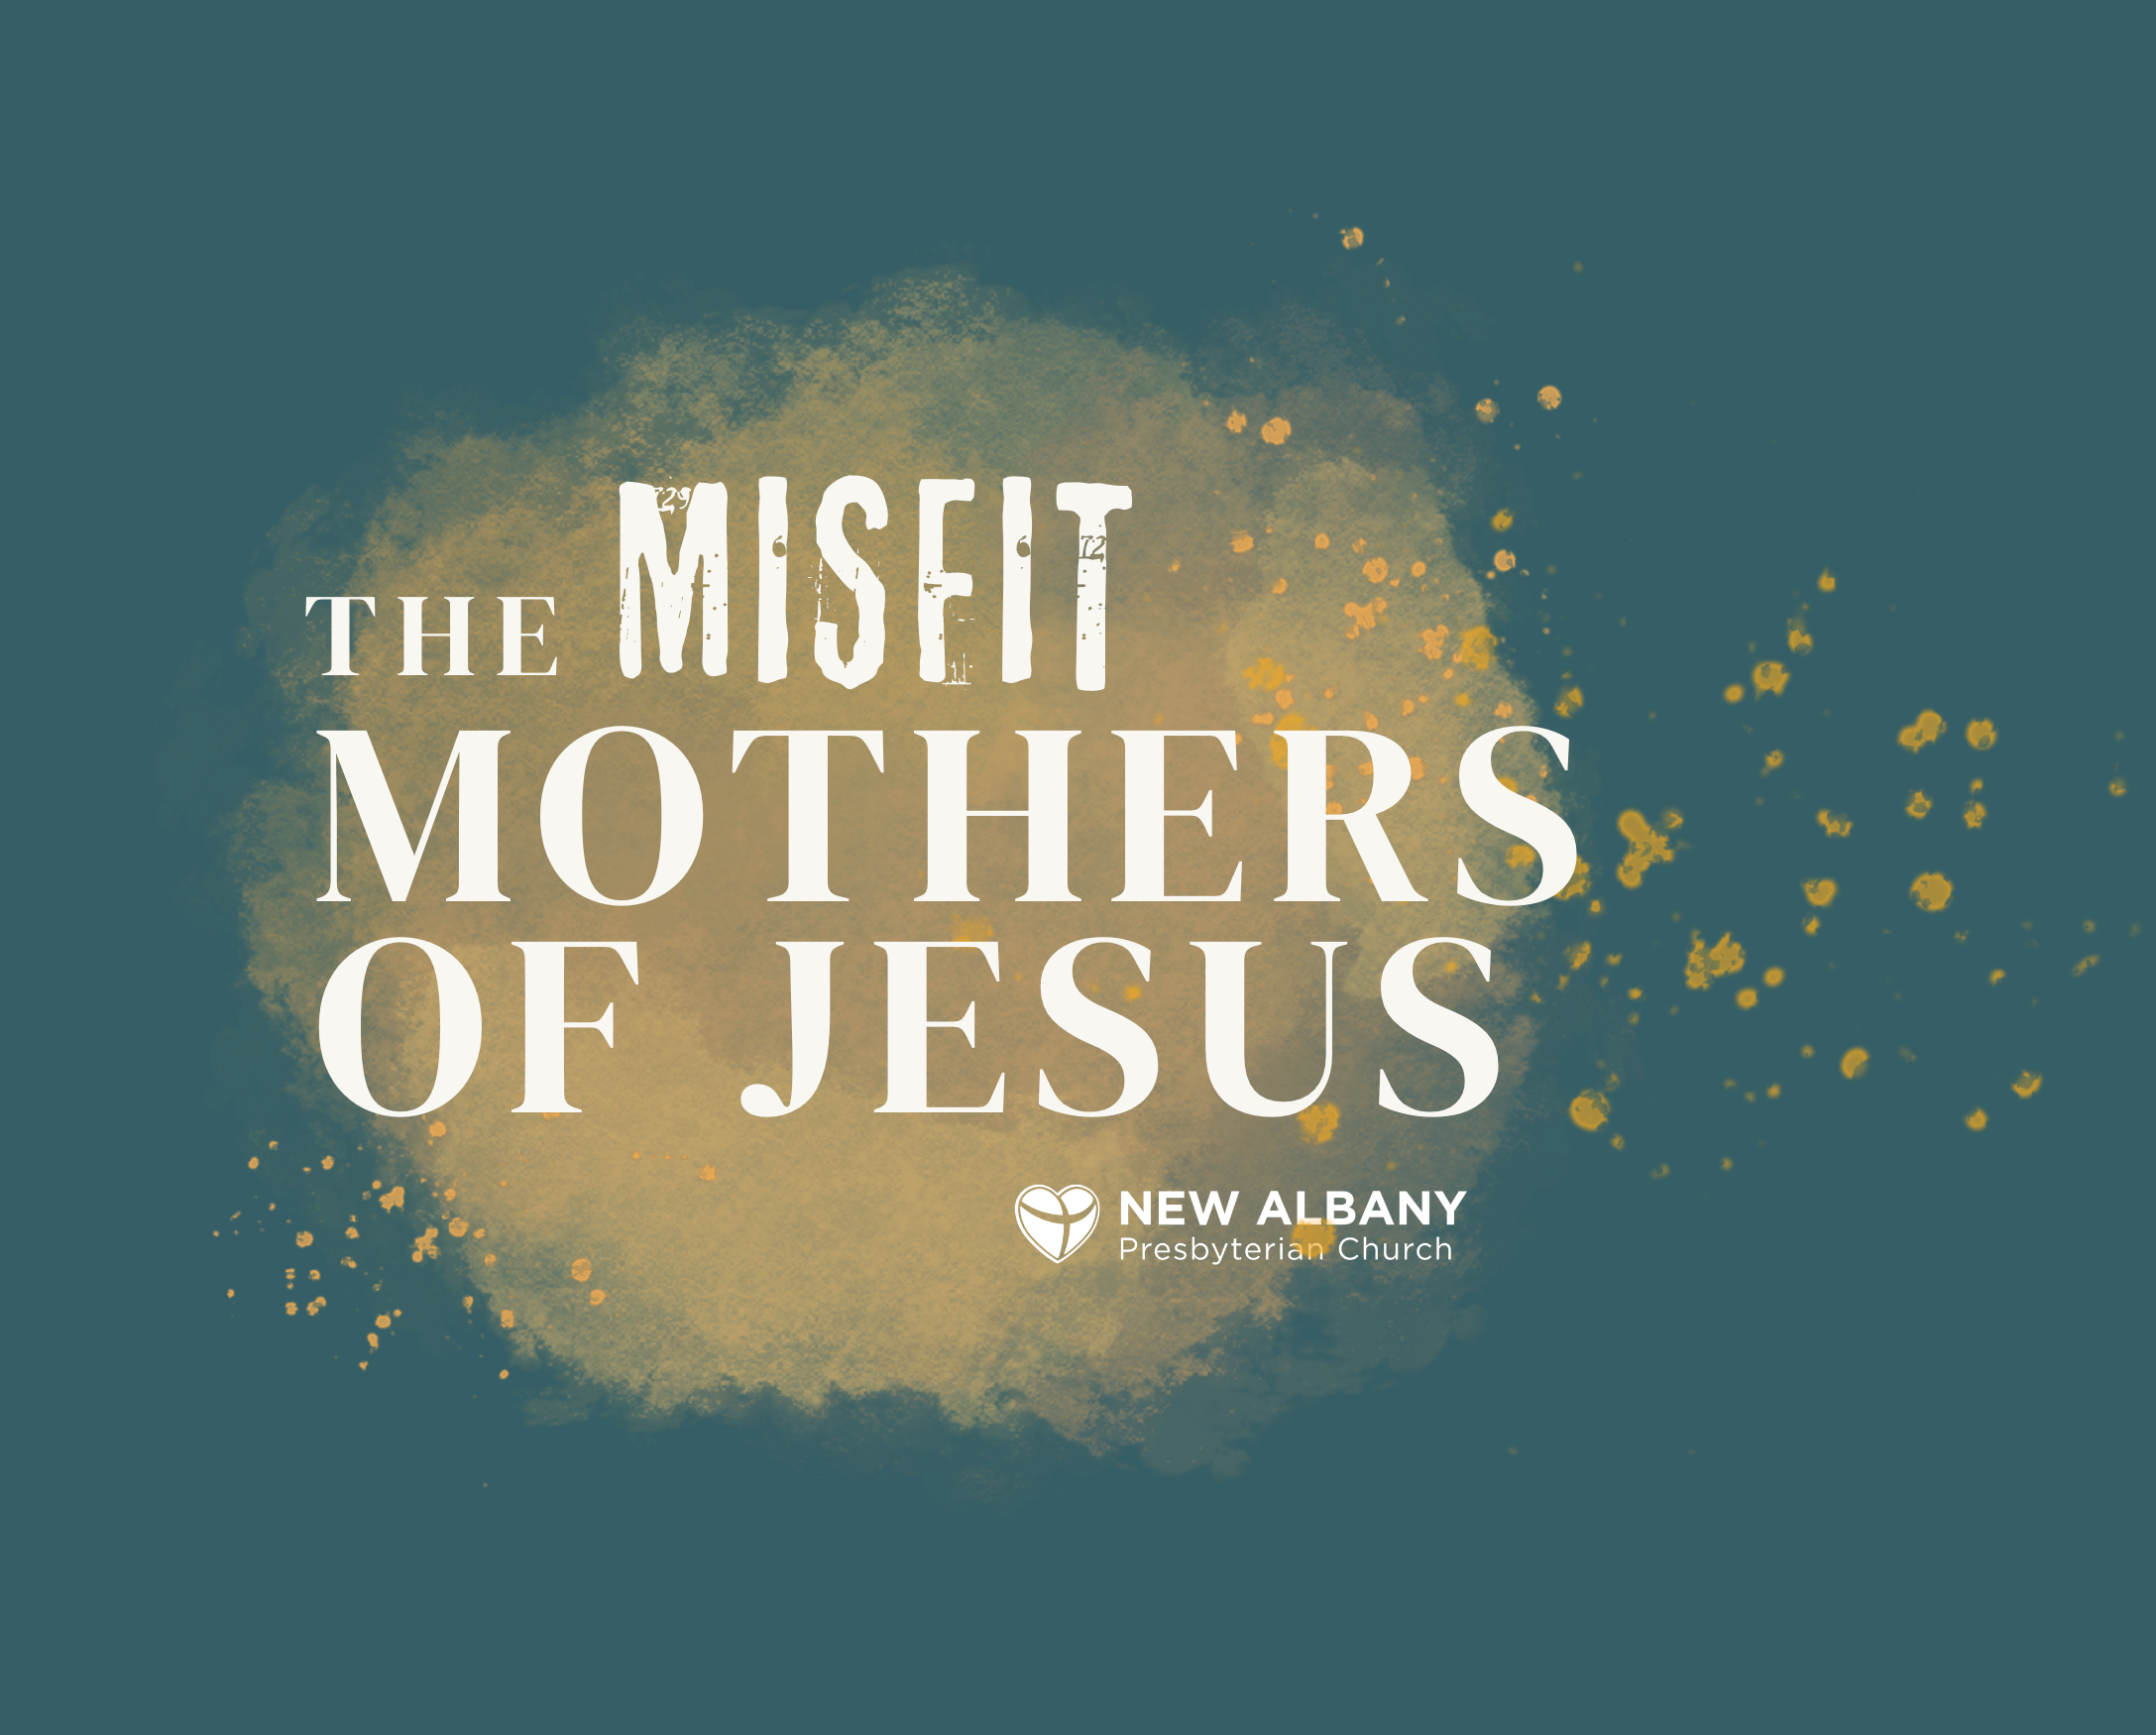 The Misfit Mothers of Jesus: Mary